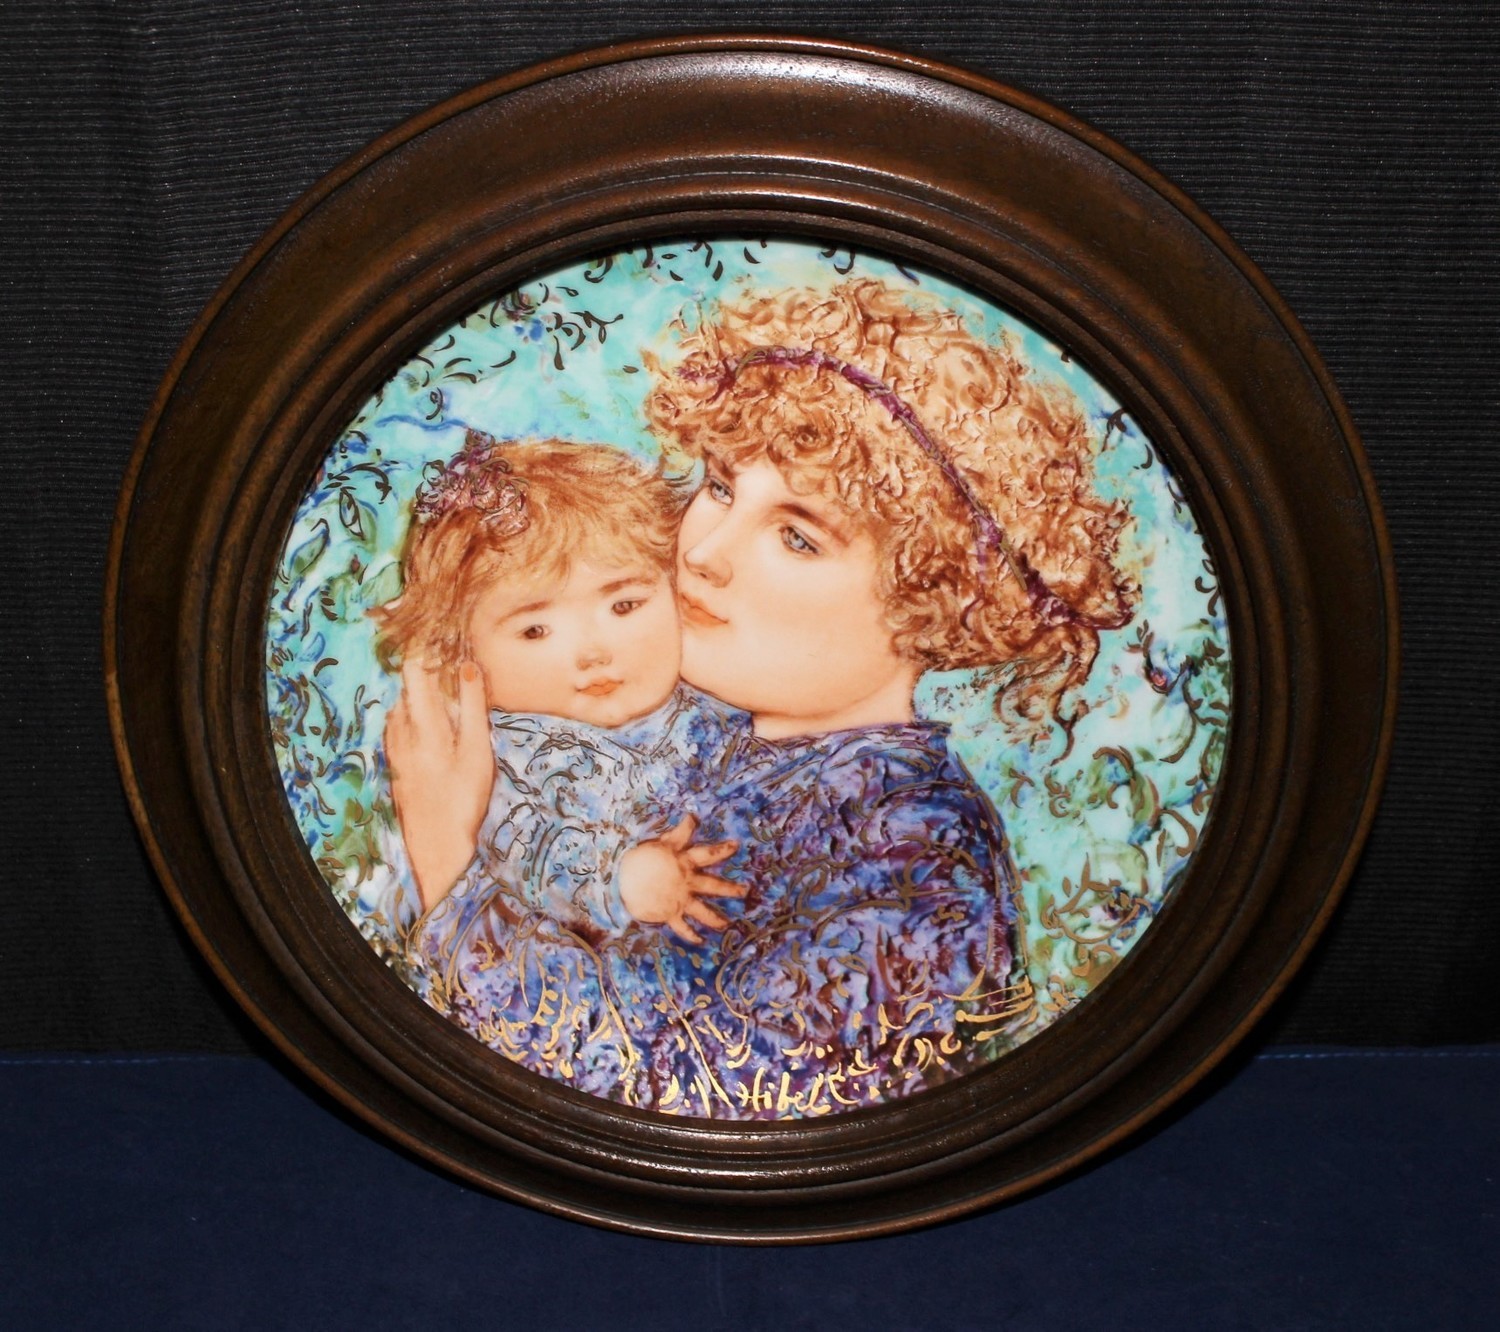 Knowles 1989 Mother’s Day “Jessica & Kate” by Edna Hibel Framed Plate #6021A